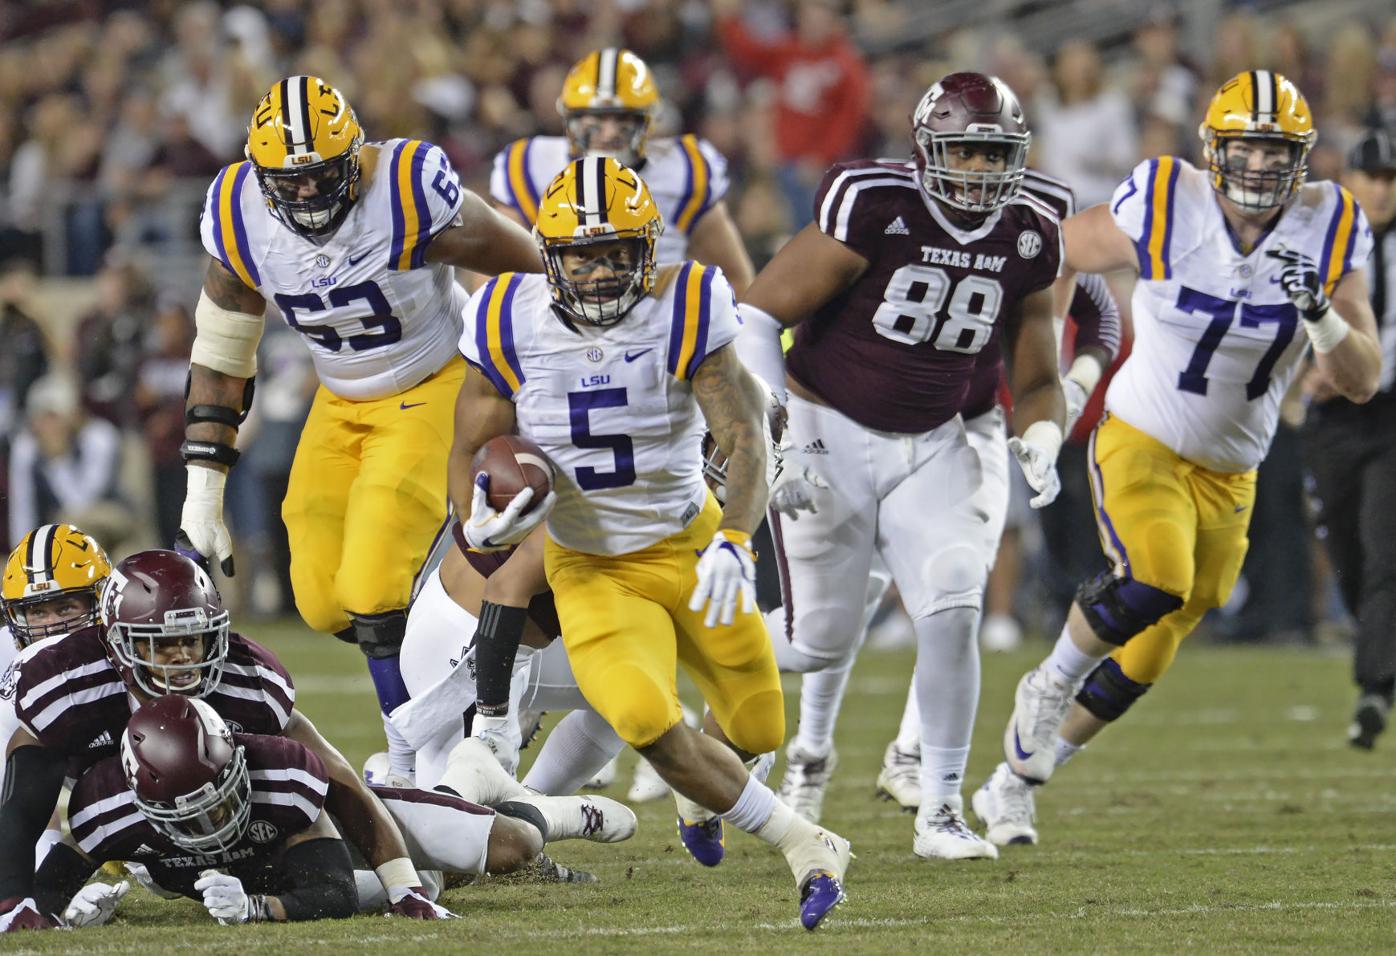 Texas A&M Aggies vs. LSU Tigers Week 13: Offensive Players to